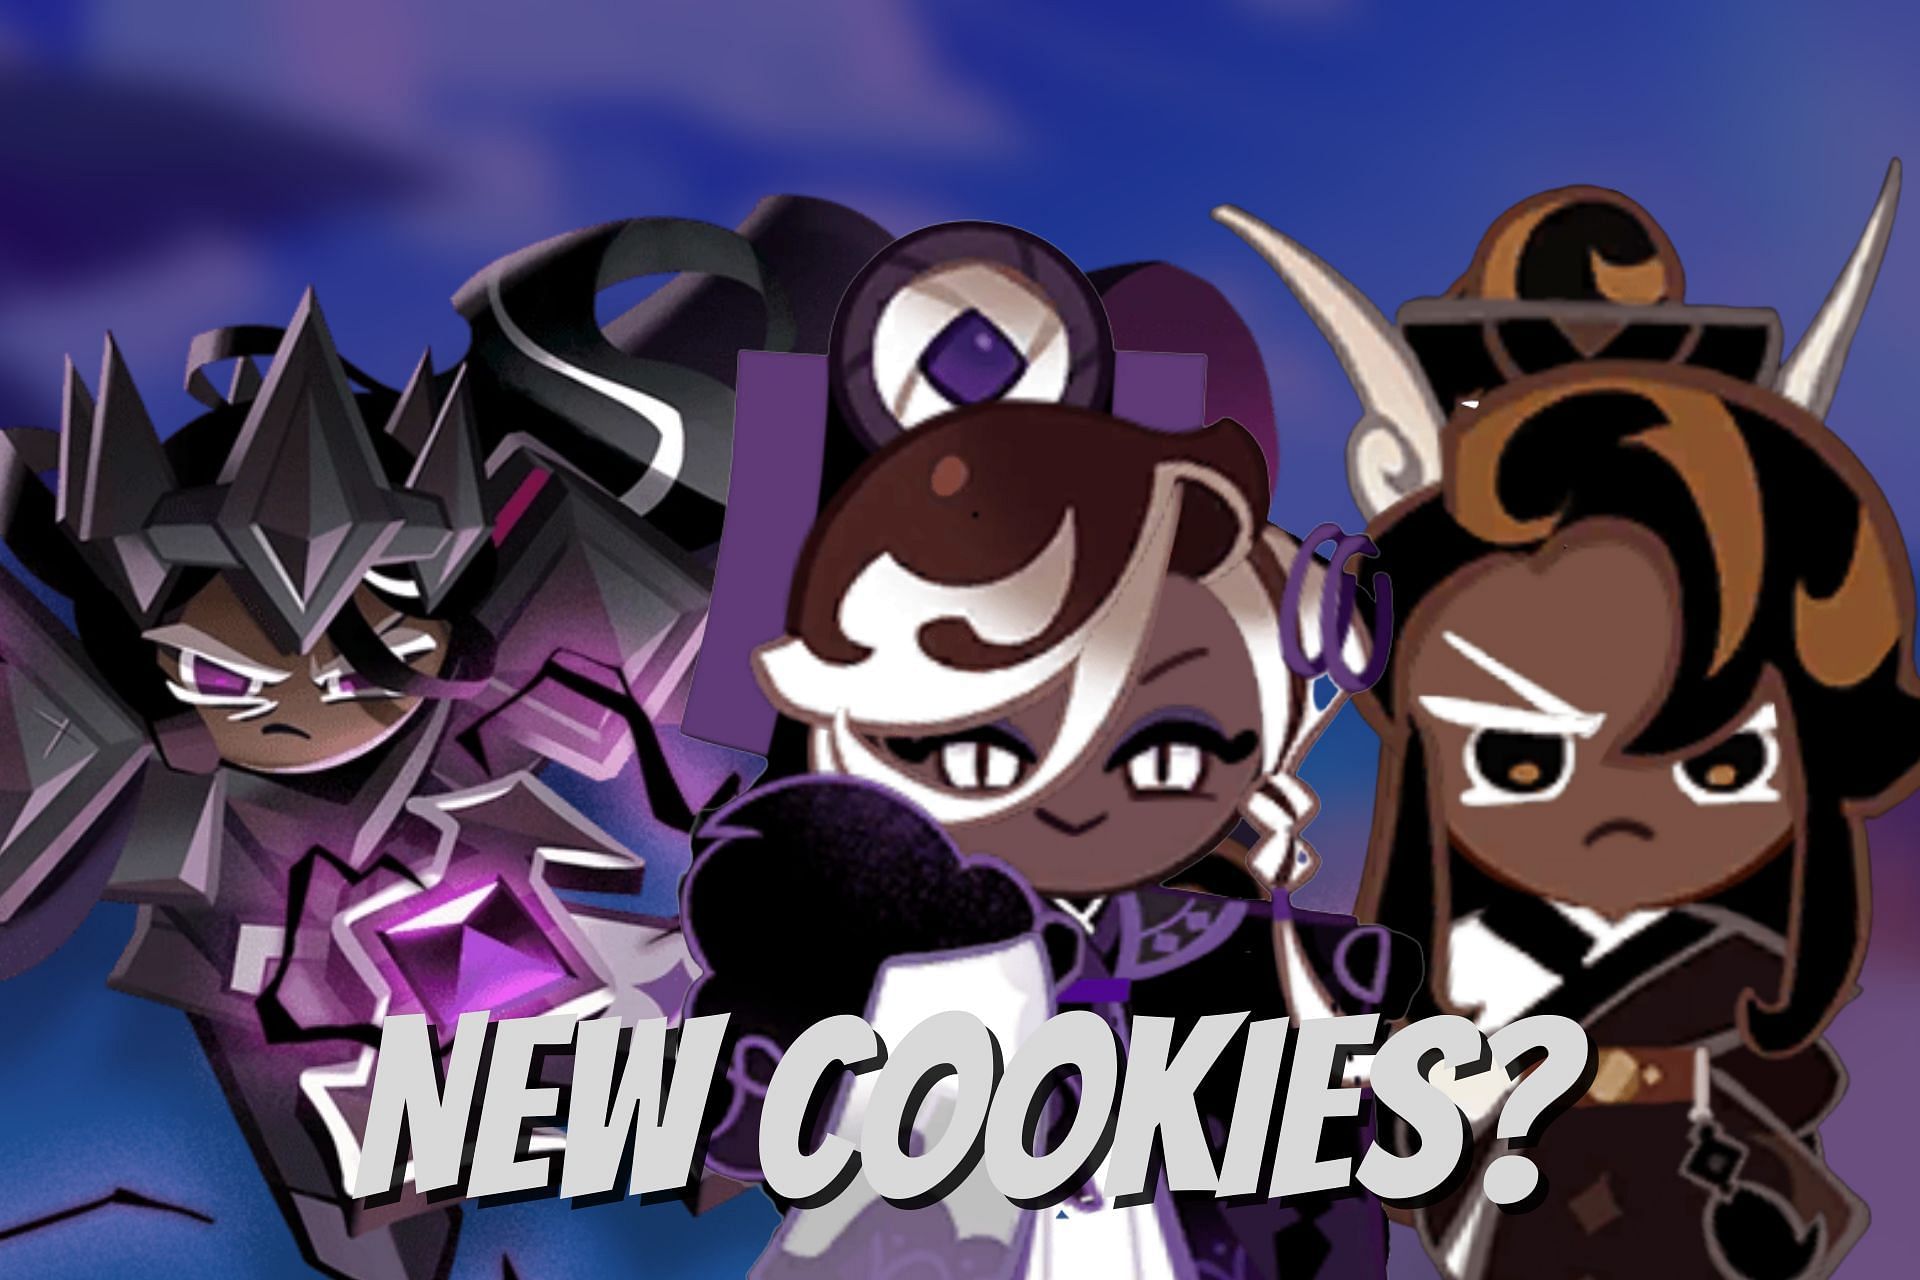 Who are the new cookies coming to Cookie Run Kingdom?